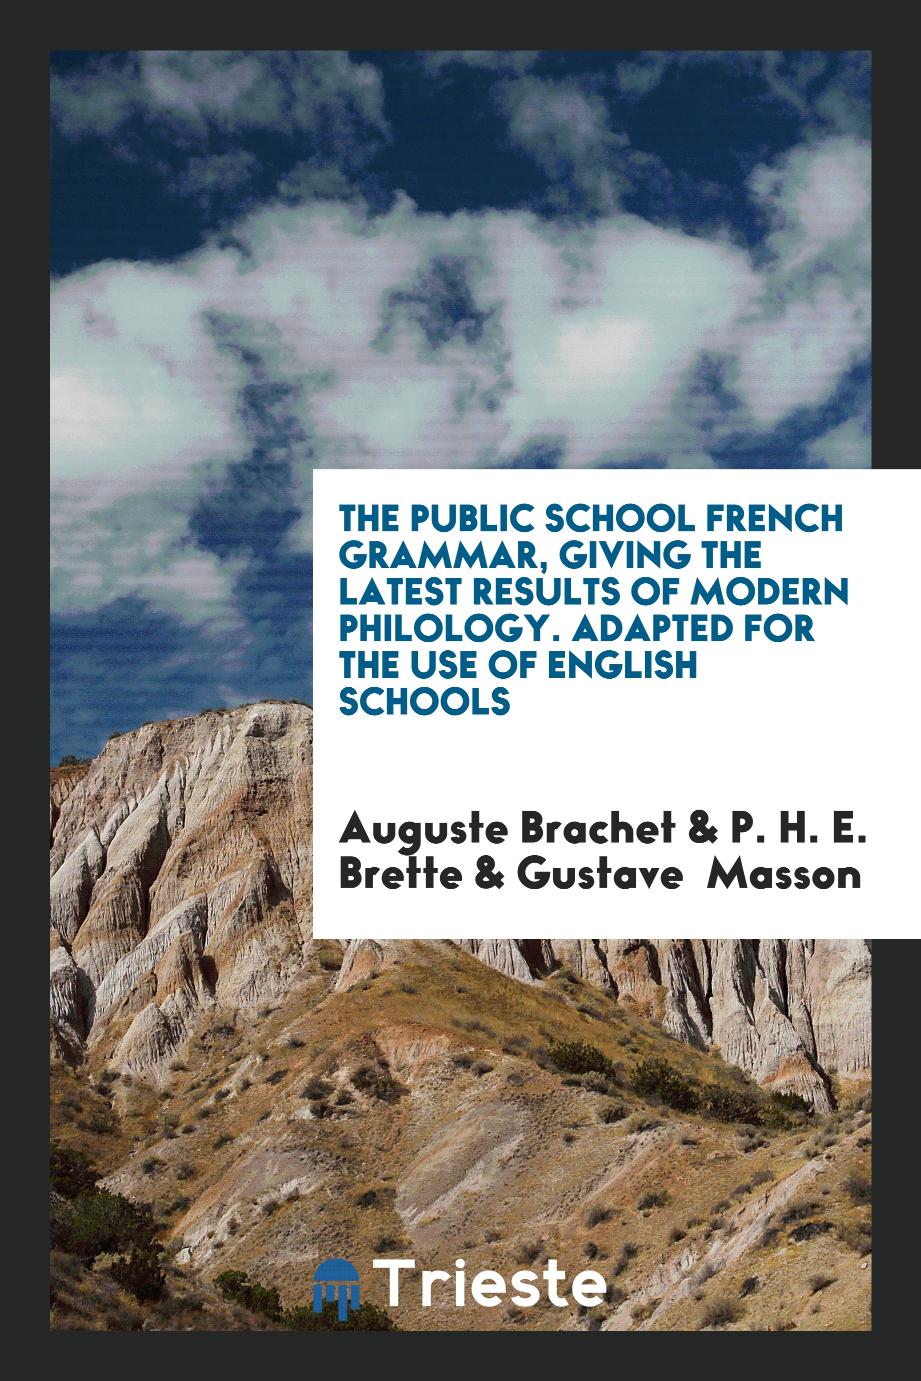 The Public School French Grammar, Giving the Latest Results of Modern Philology. Adapted for the Use of English Schools